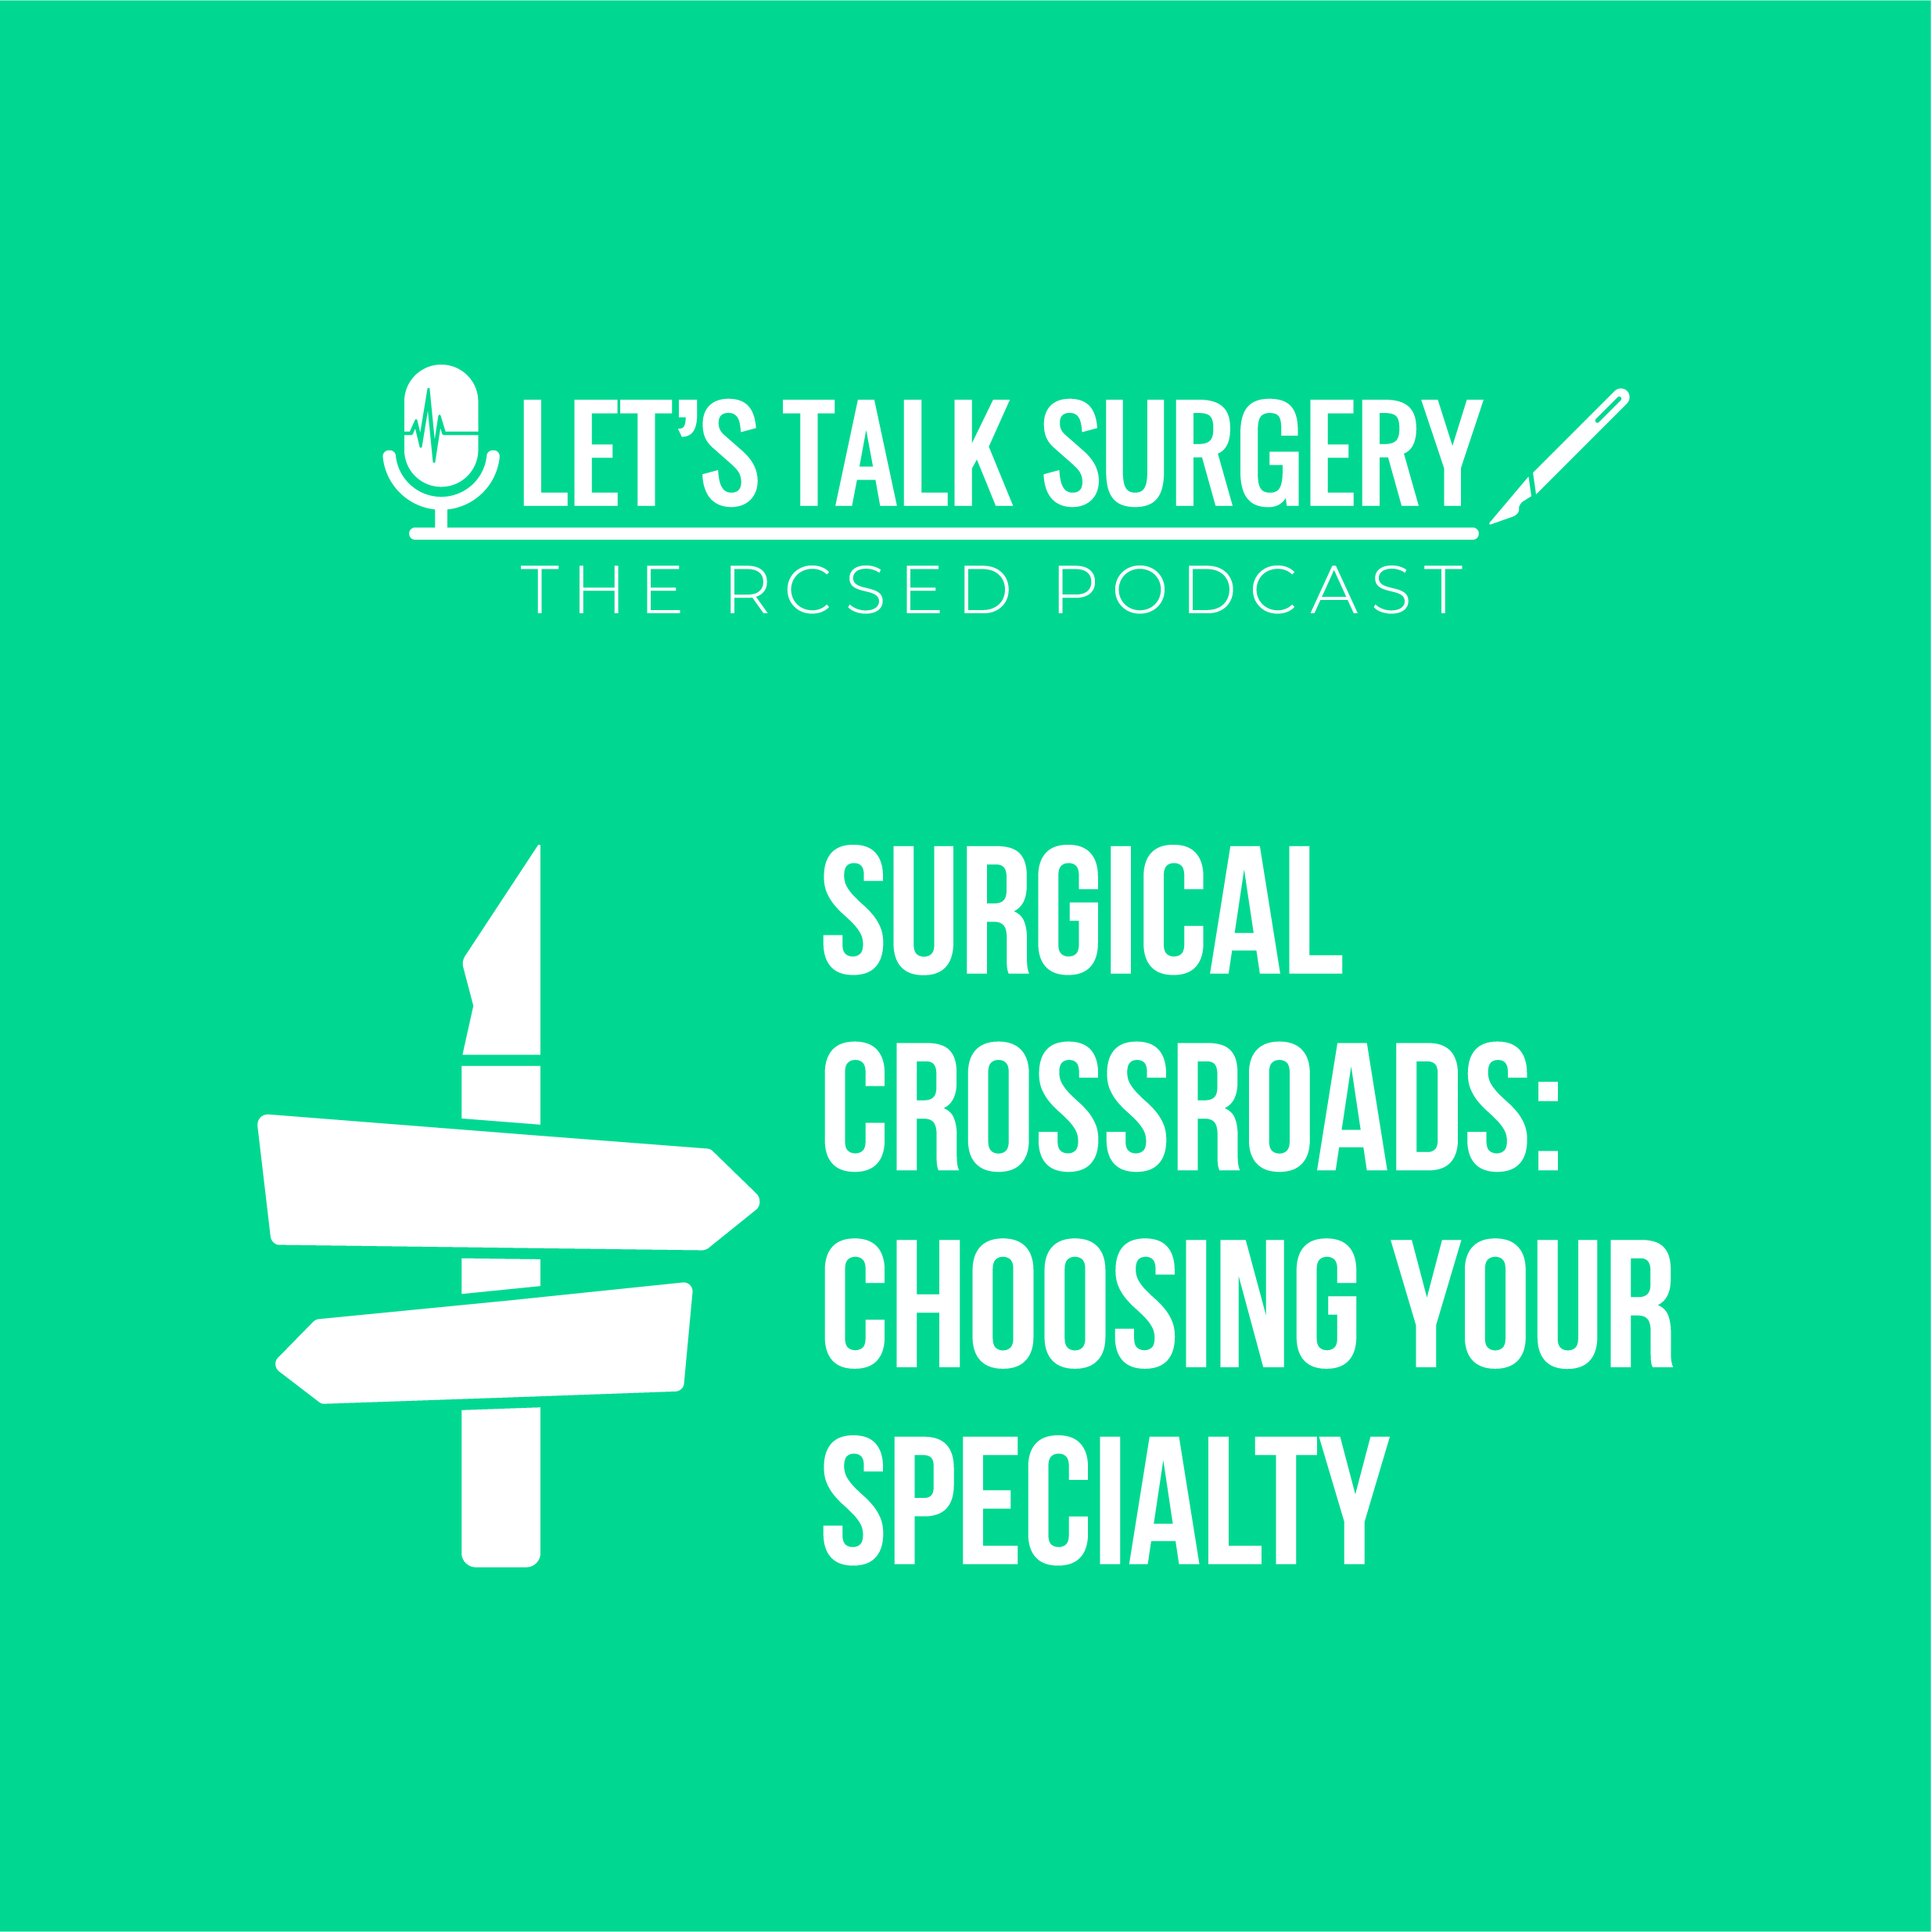 Let's Talk Surgery Podcast, Surgical Crossroads: "Choosing your specialty - the Vascular episode"